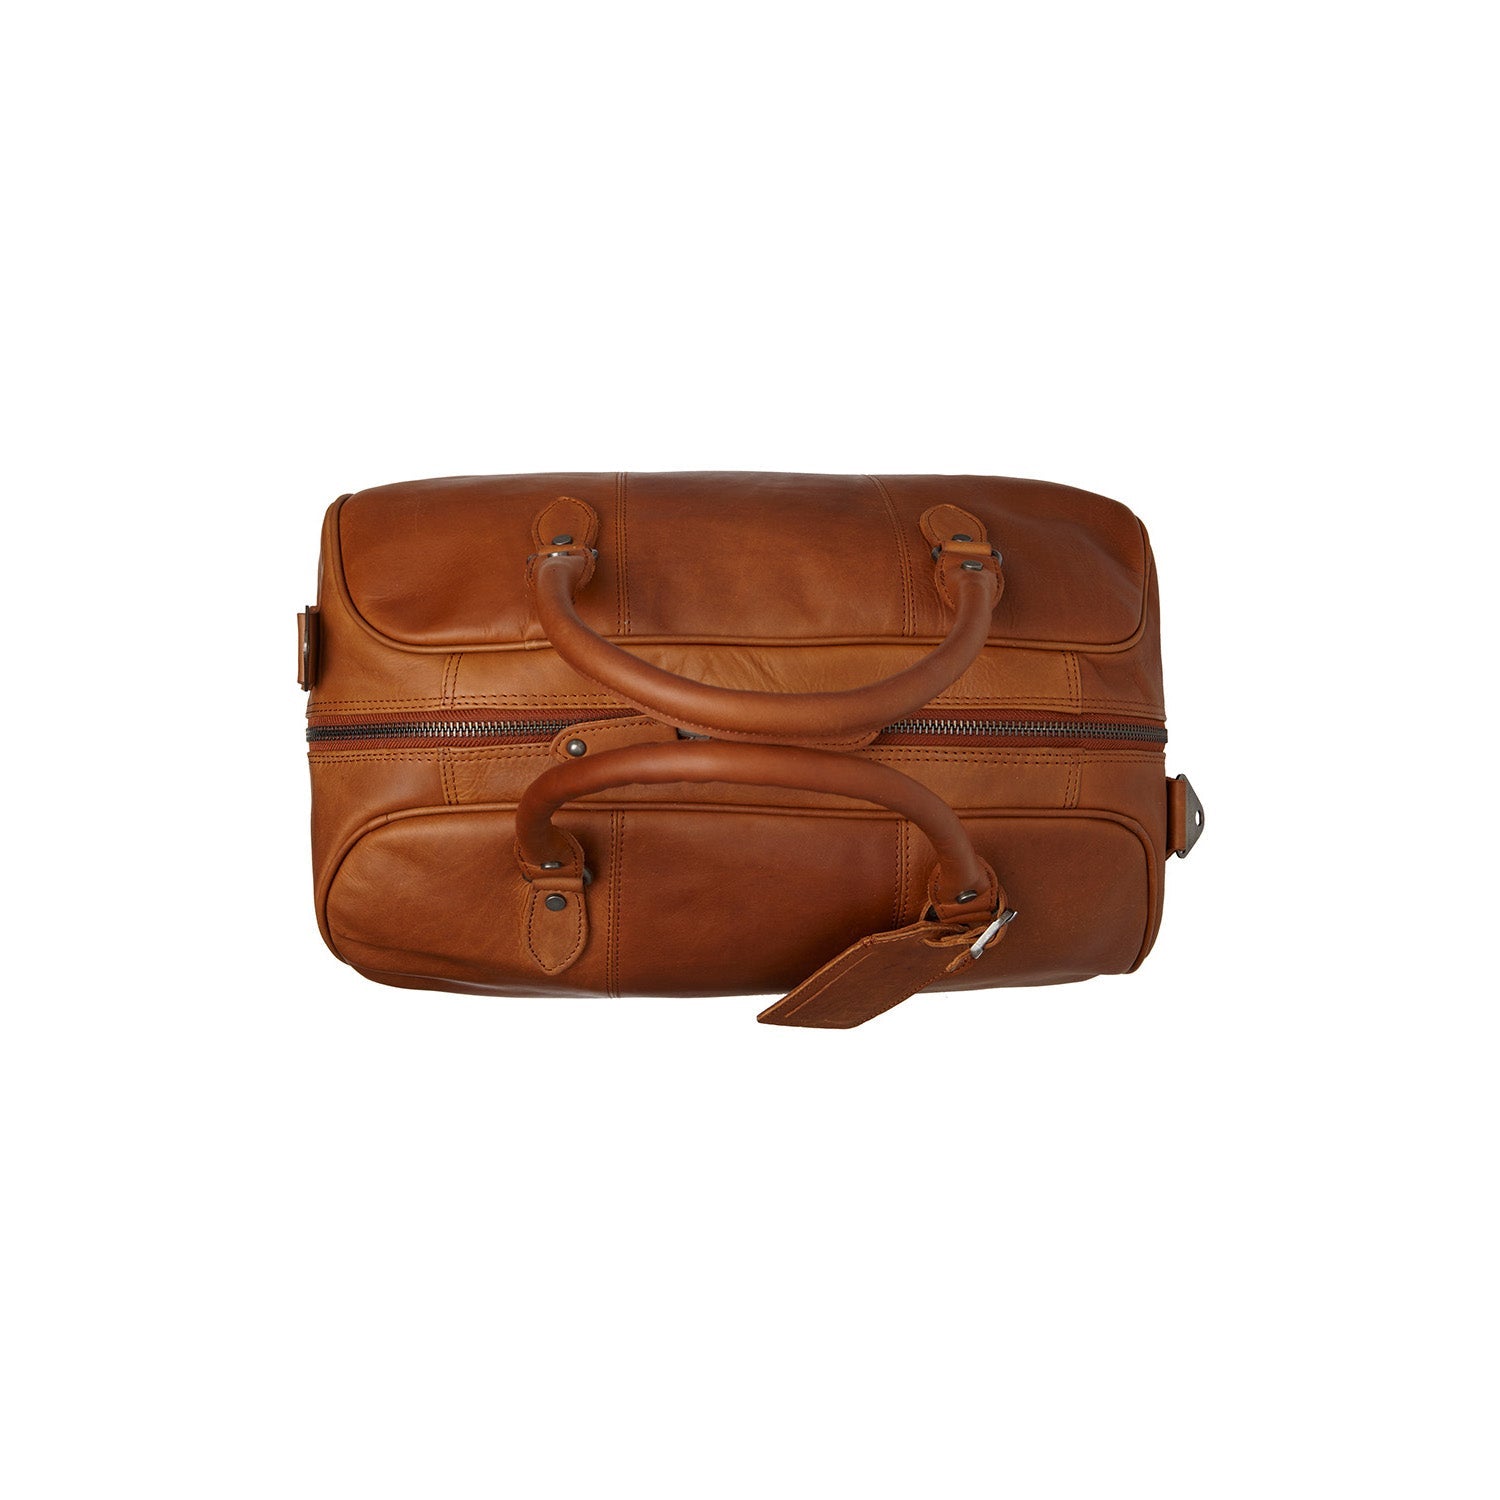 Leather Weekend Bag - The Chesterfield Brand Liam Cognac